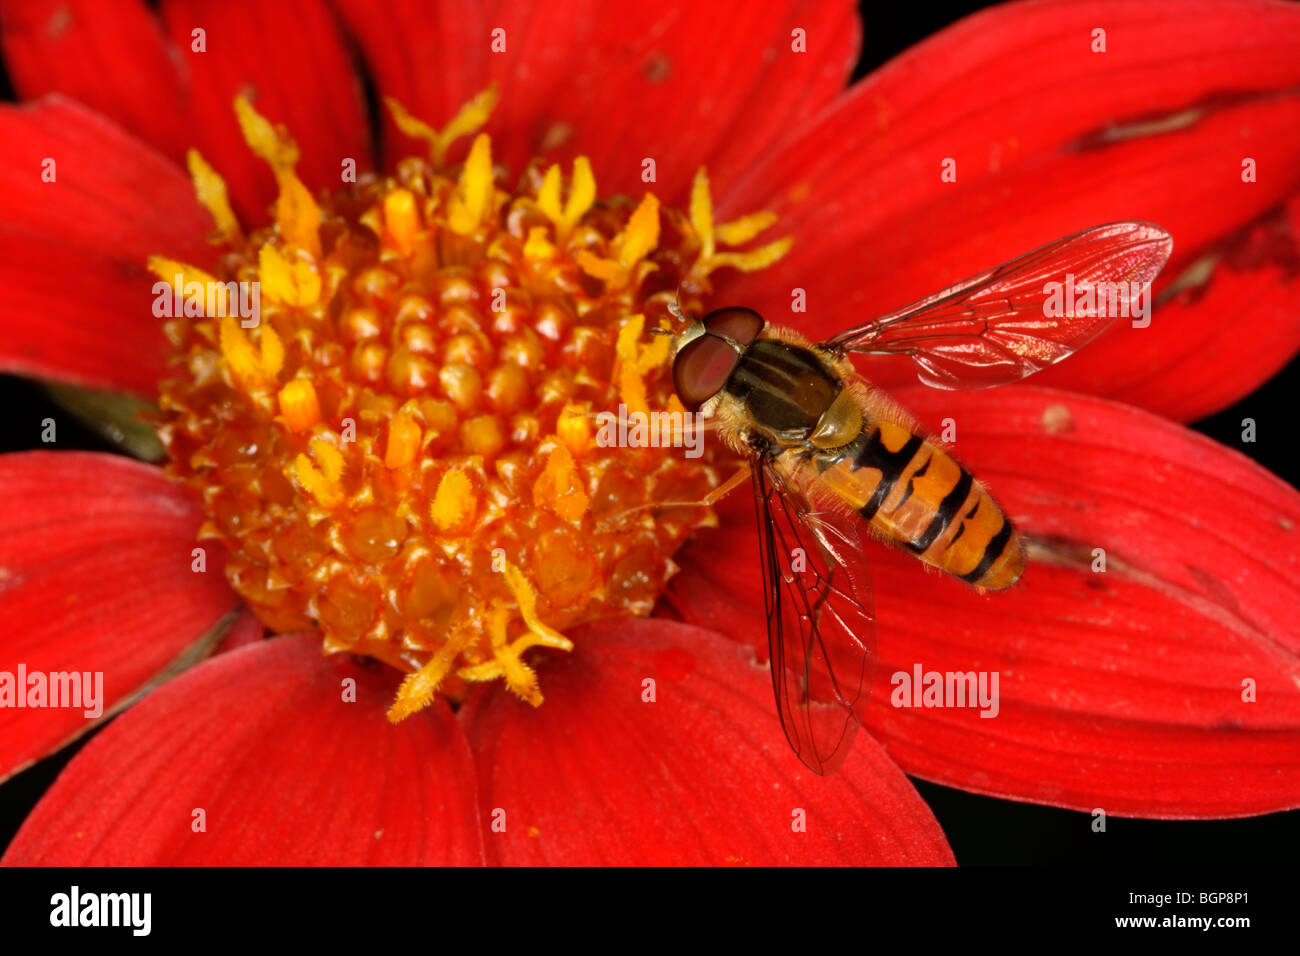 Hoverfly, close-up. Stock Photo